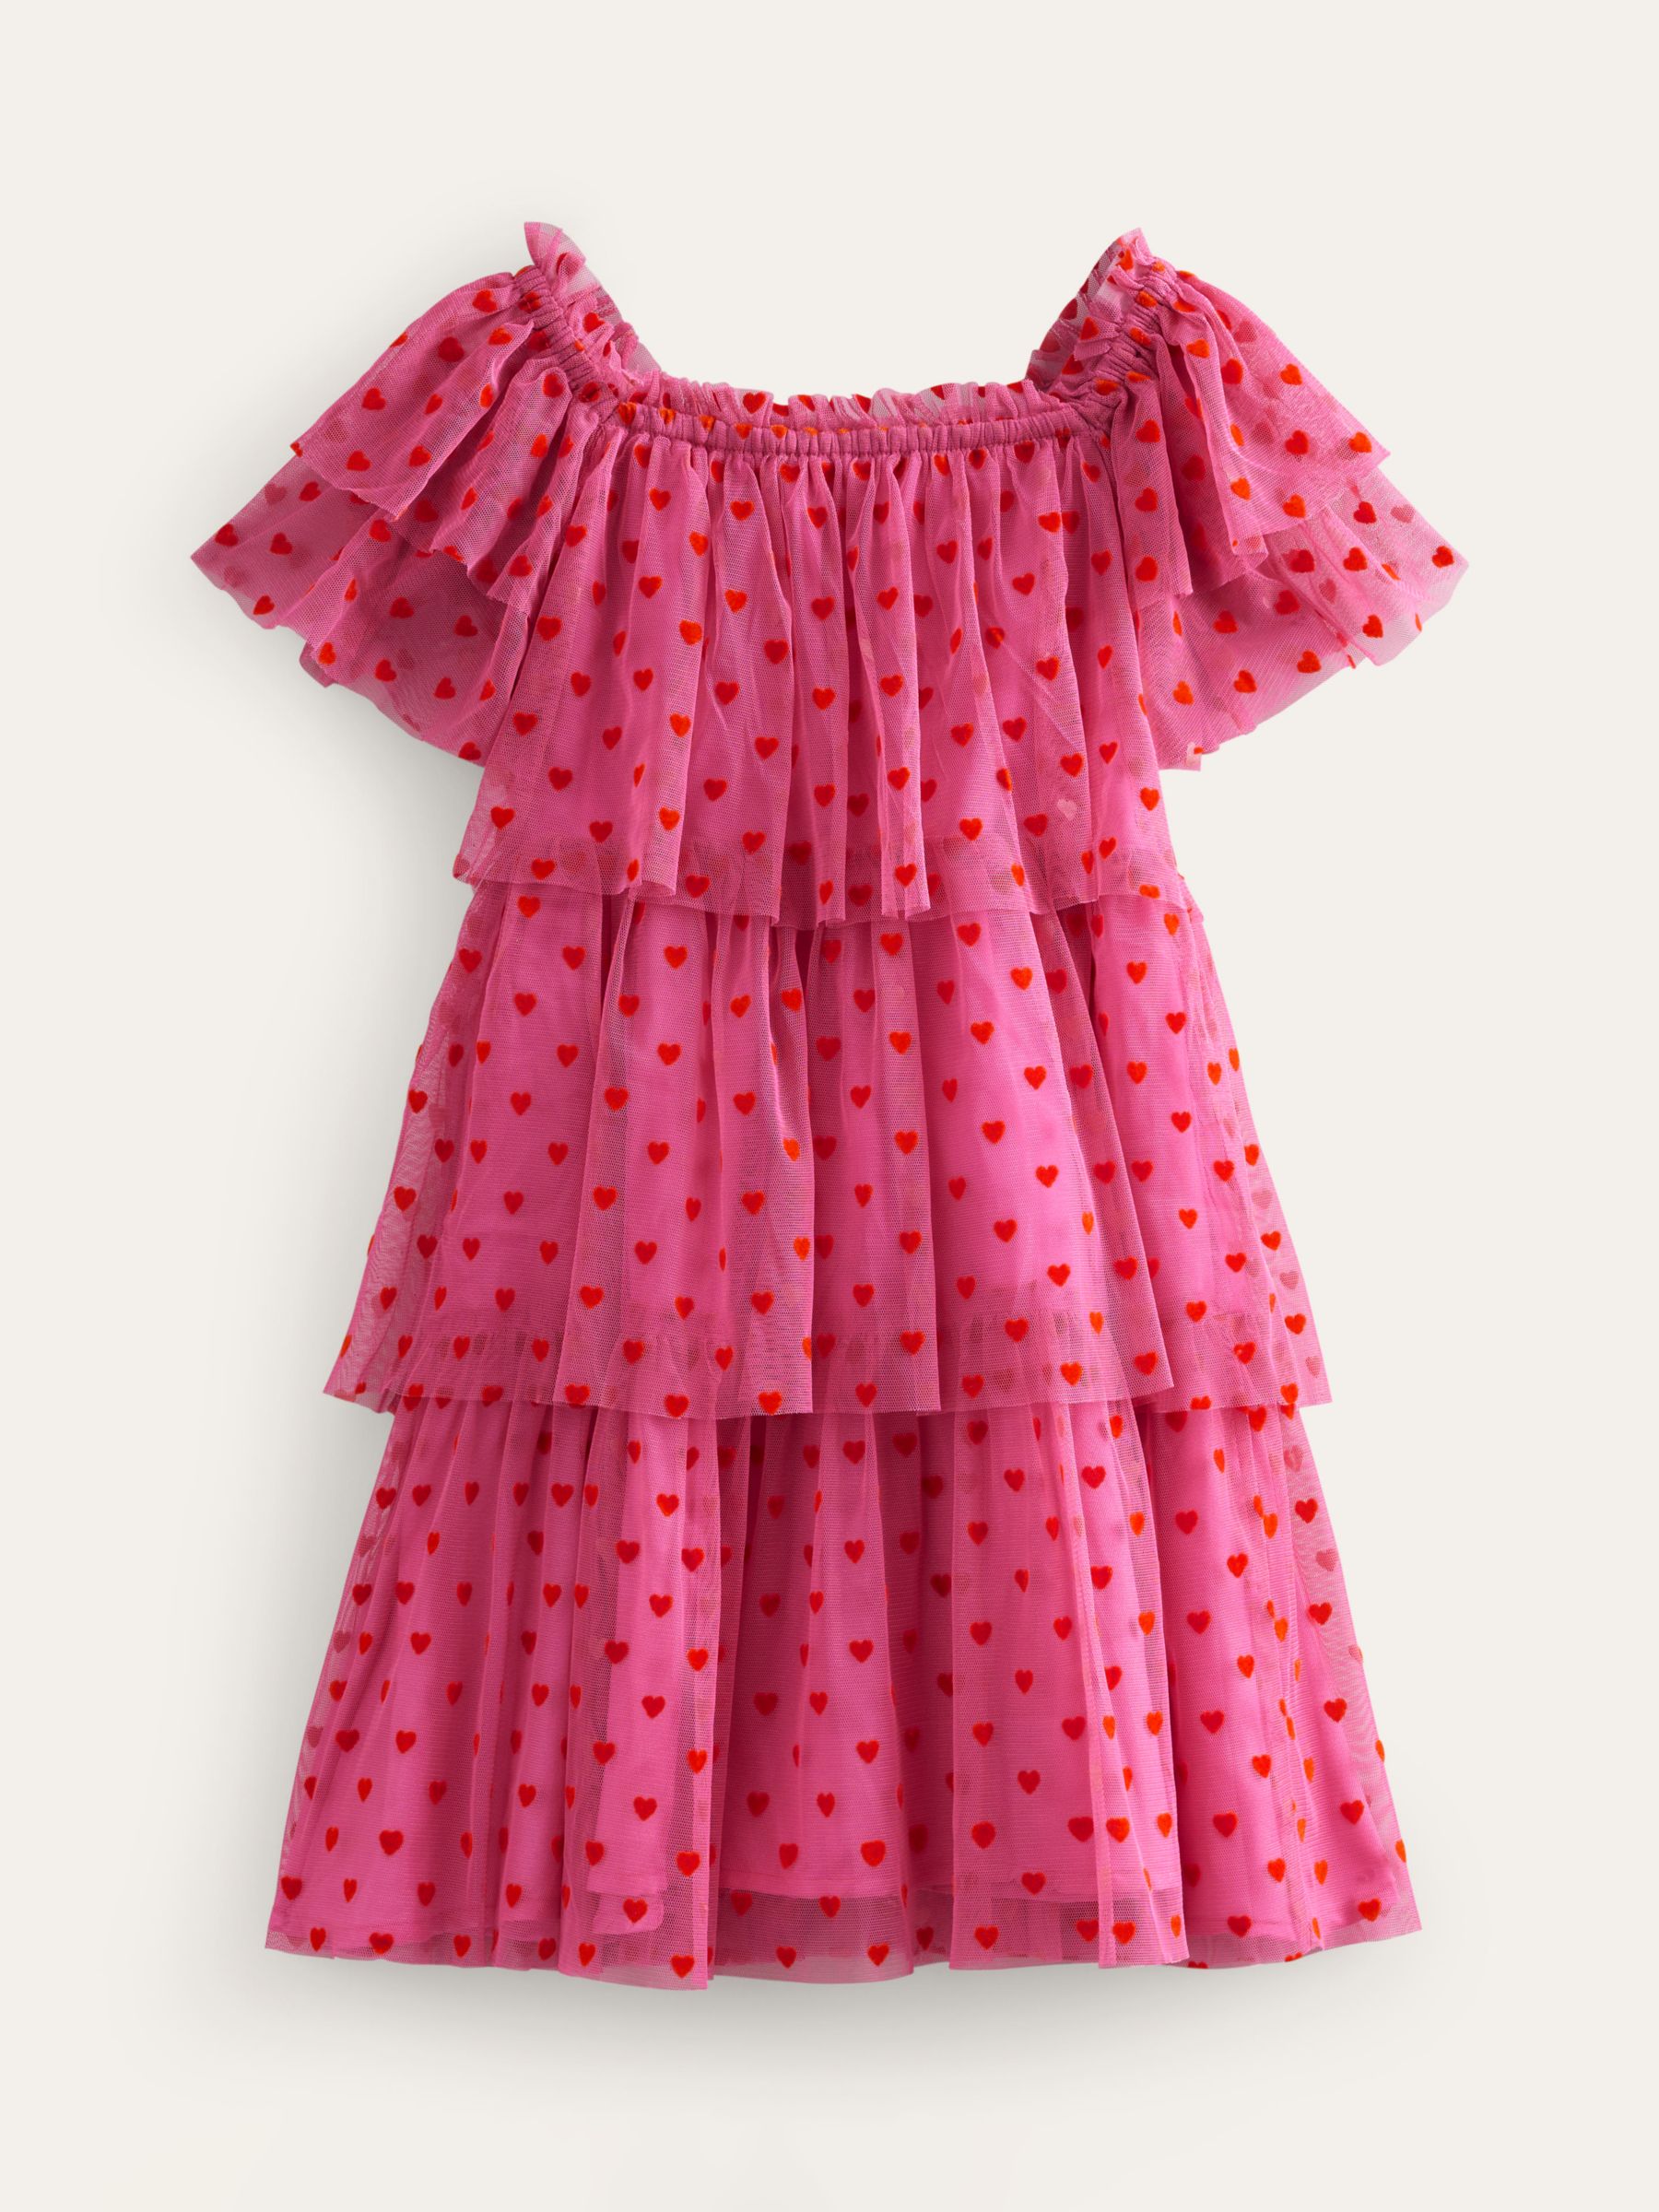 Mini Boden Kids' Heart Print Tiered Tulle Dress, Pink, 2-3 years